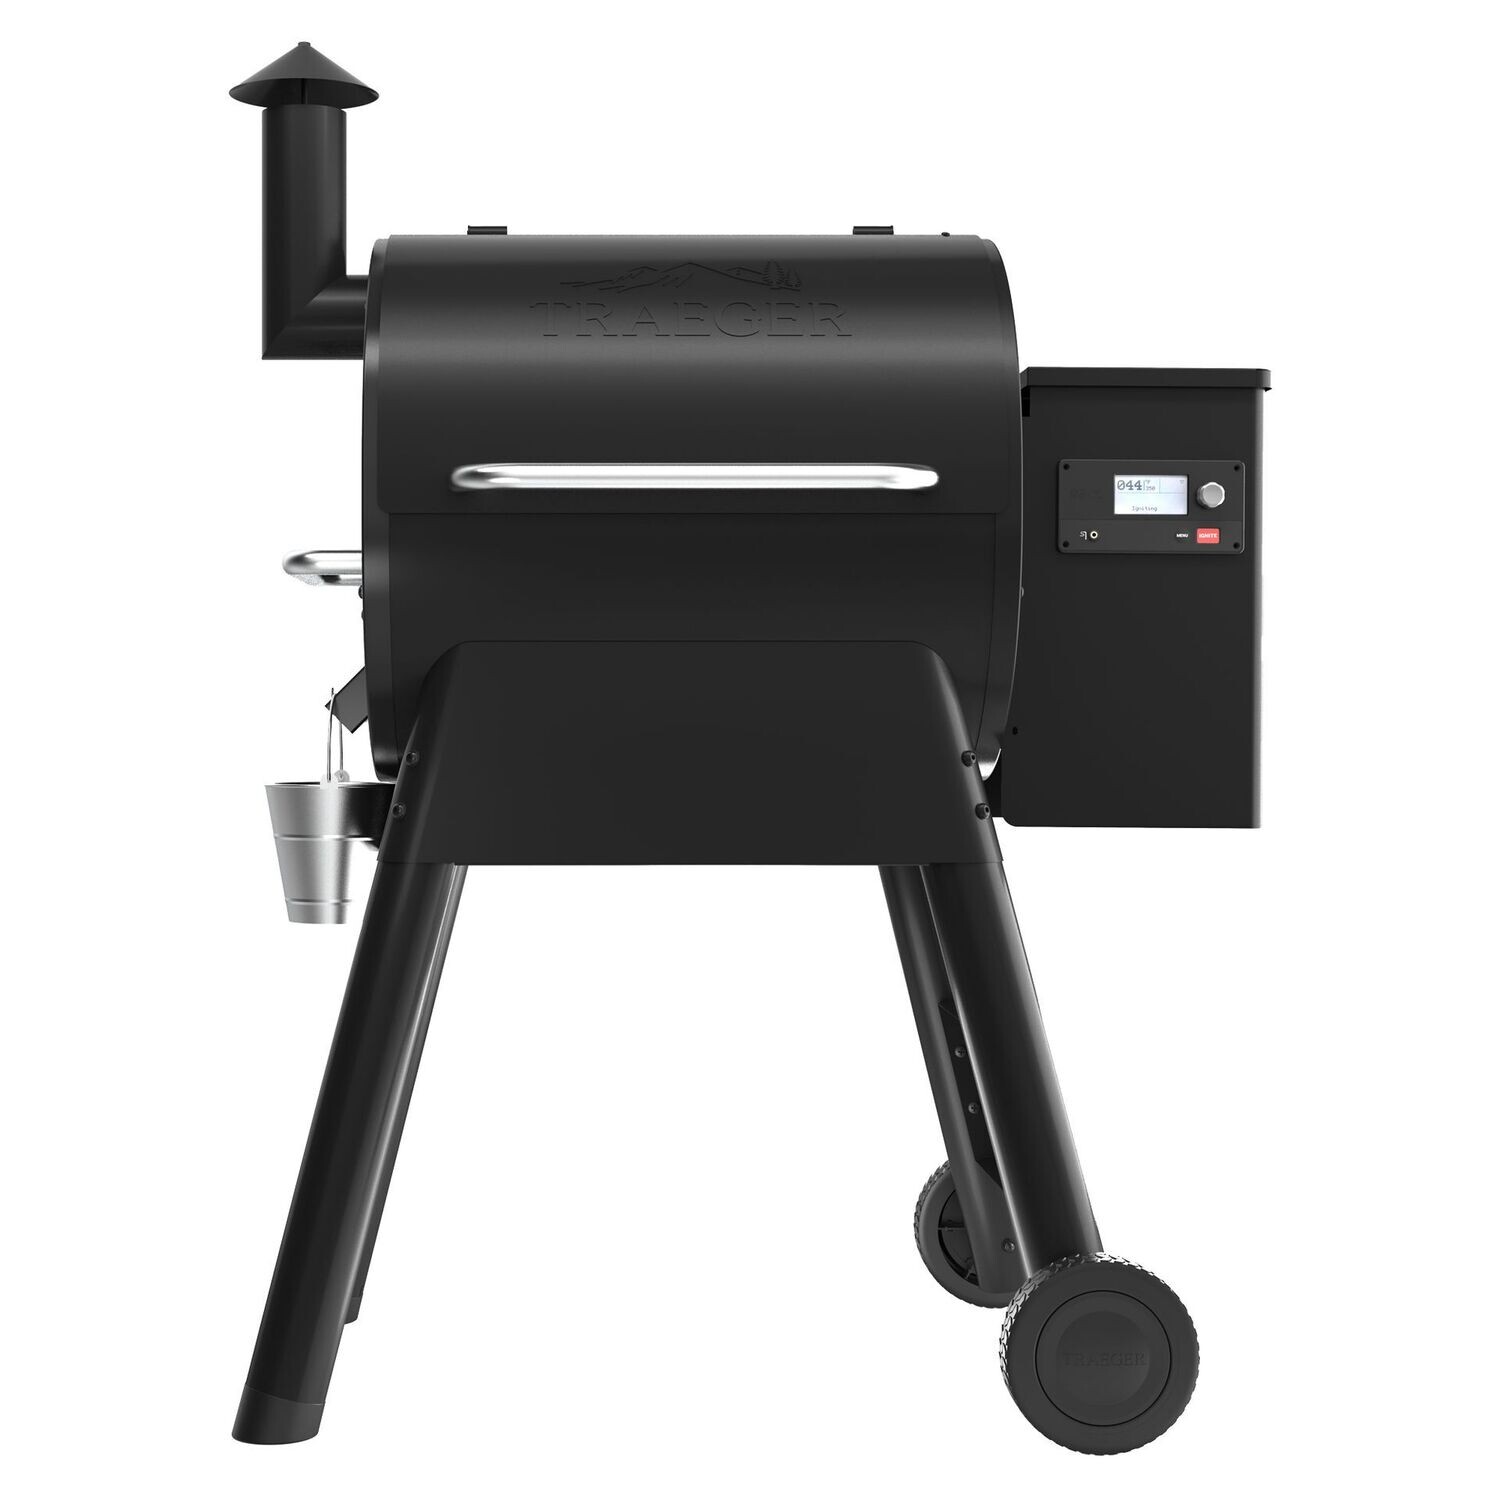 TRAEGER PRO 575 PELLET GRILL (Includes Cover & 2 Bags of Pellets) RRP £1019.96 PROMO £799.99